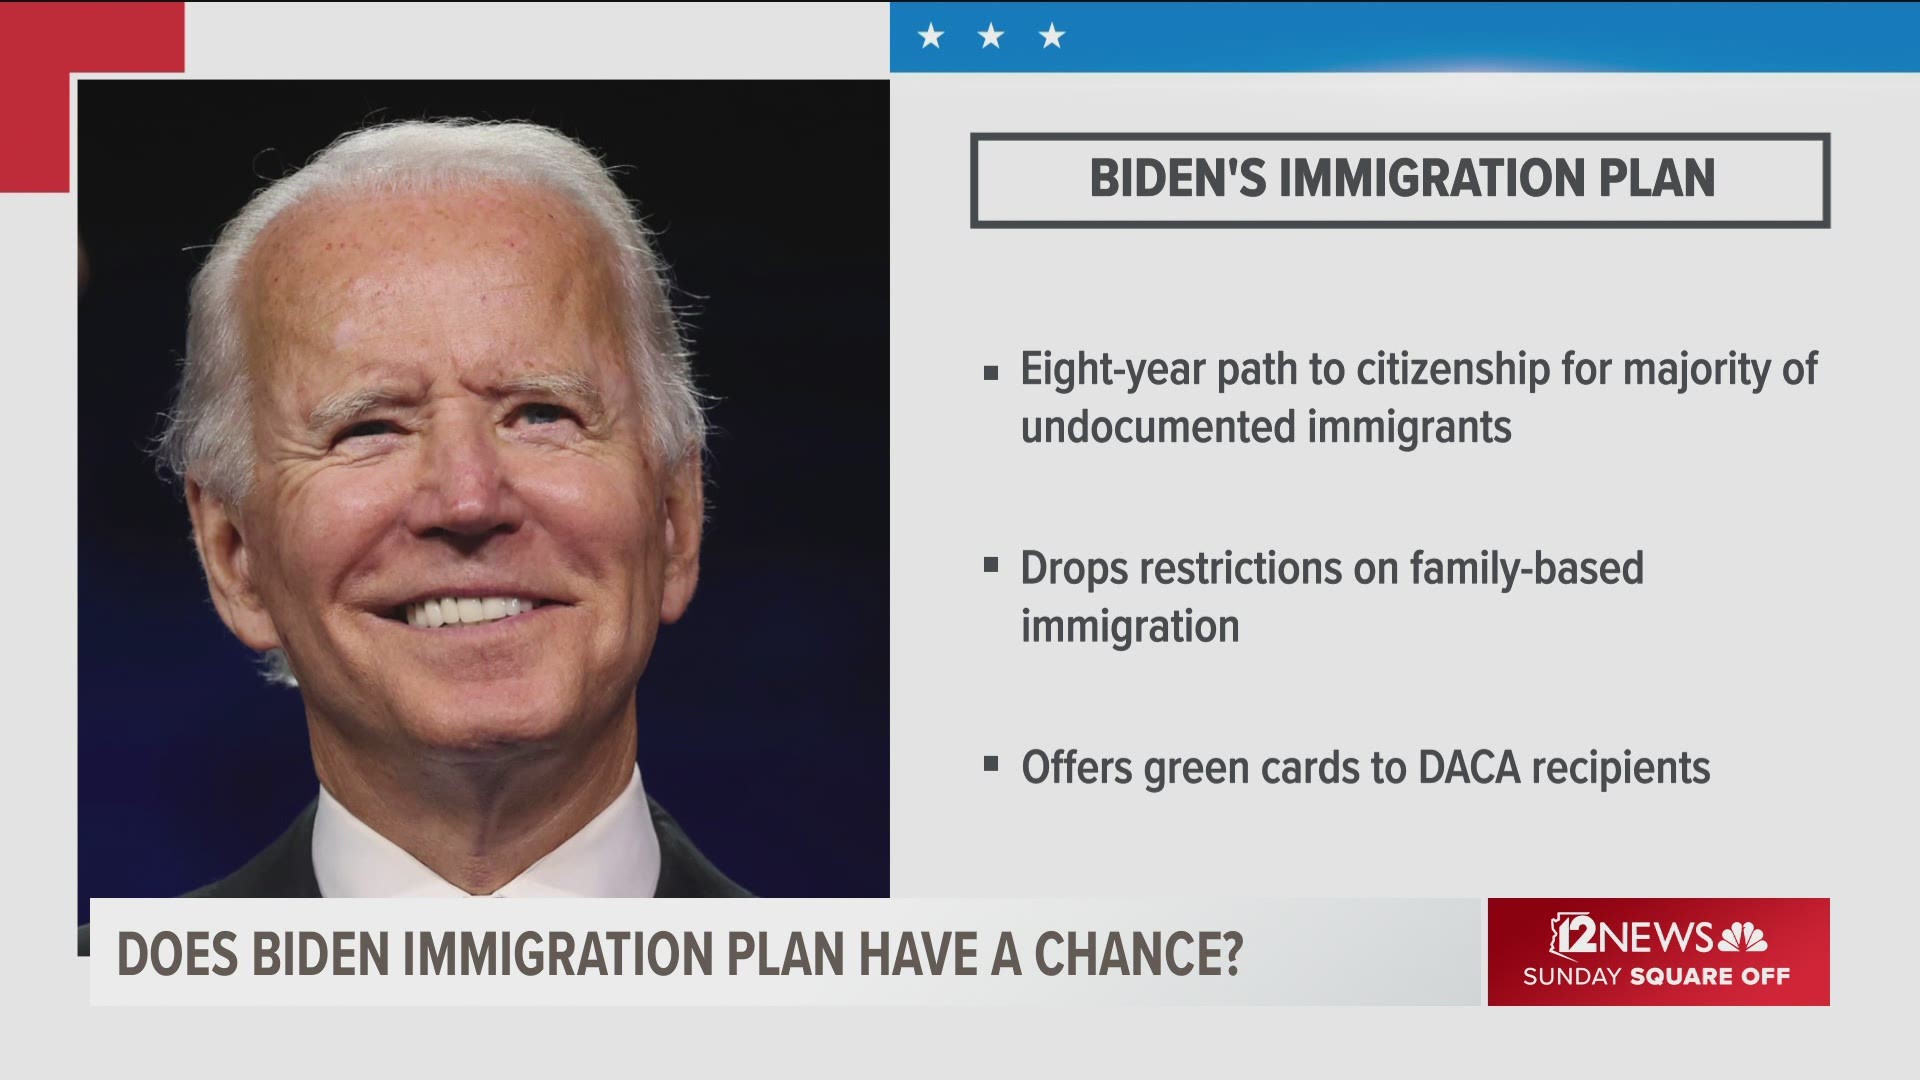 President Biden made big campaign promises on immigration reform, now those promises are before Congress. Will Arizona's U.S. senators get behind them?